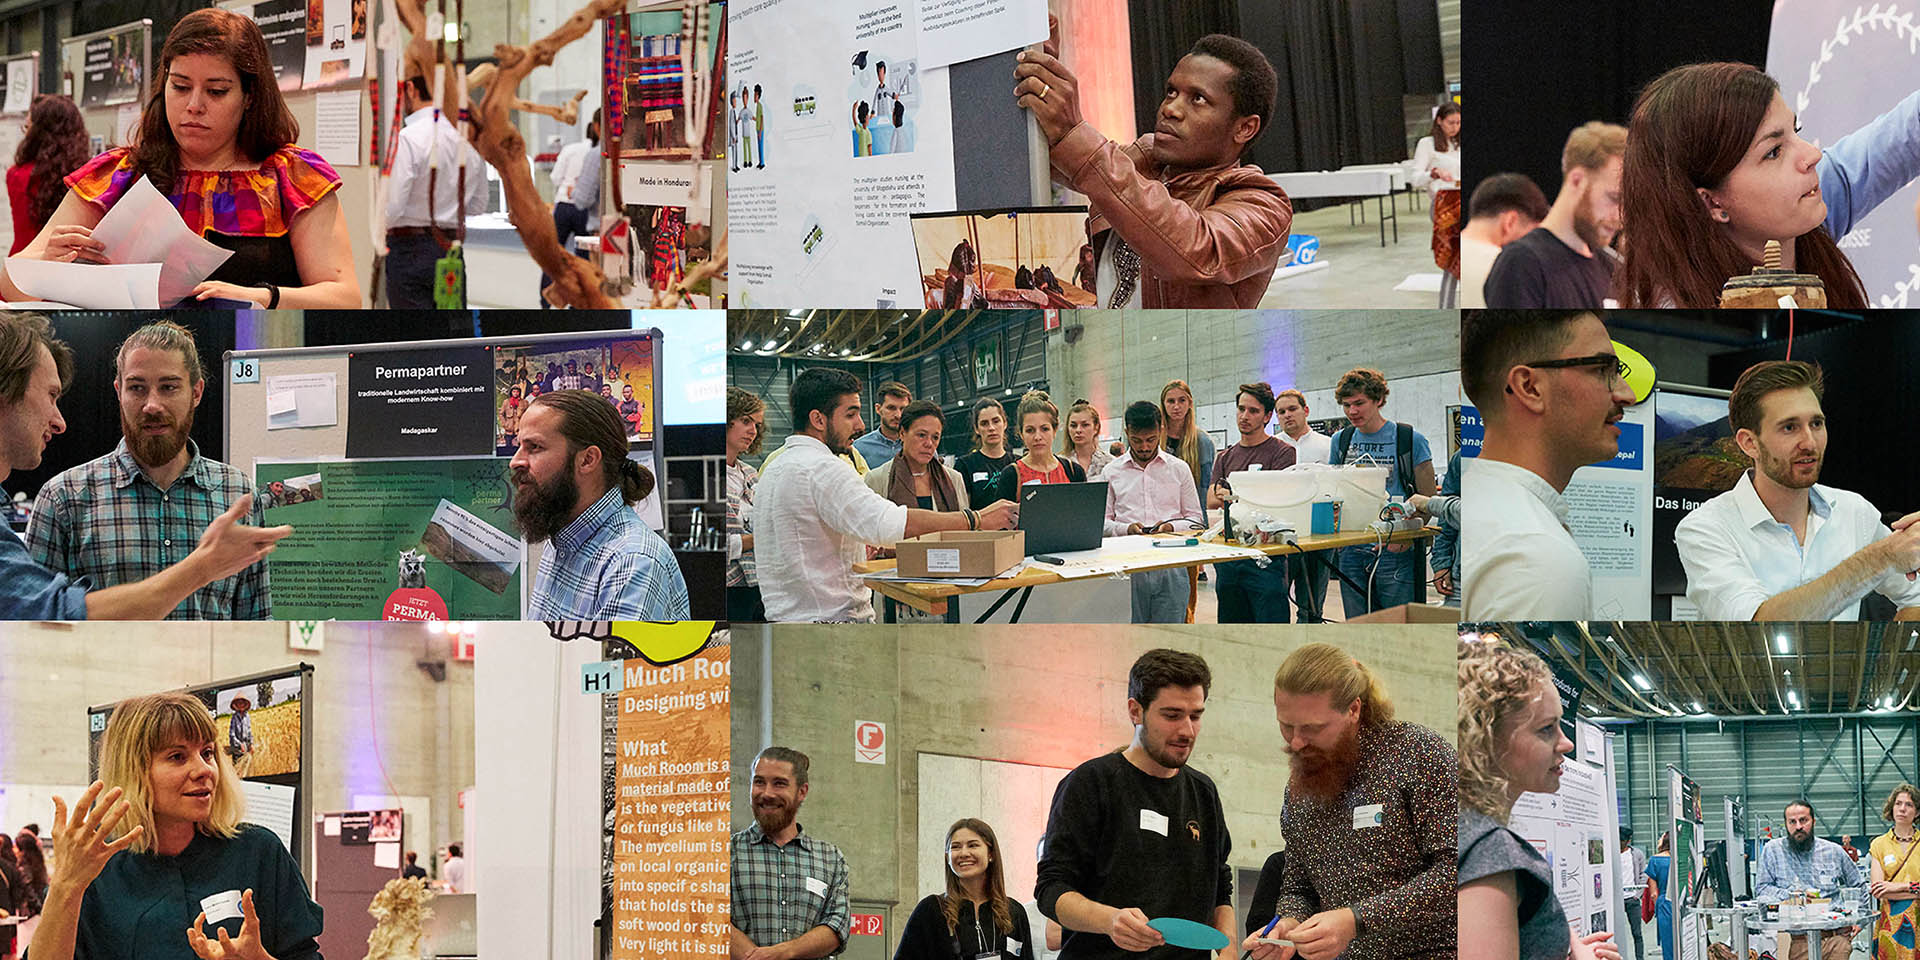 A collage of nine images shows motivated young people – alone and in groups – who are presenting their projects and engaged in conversation.